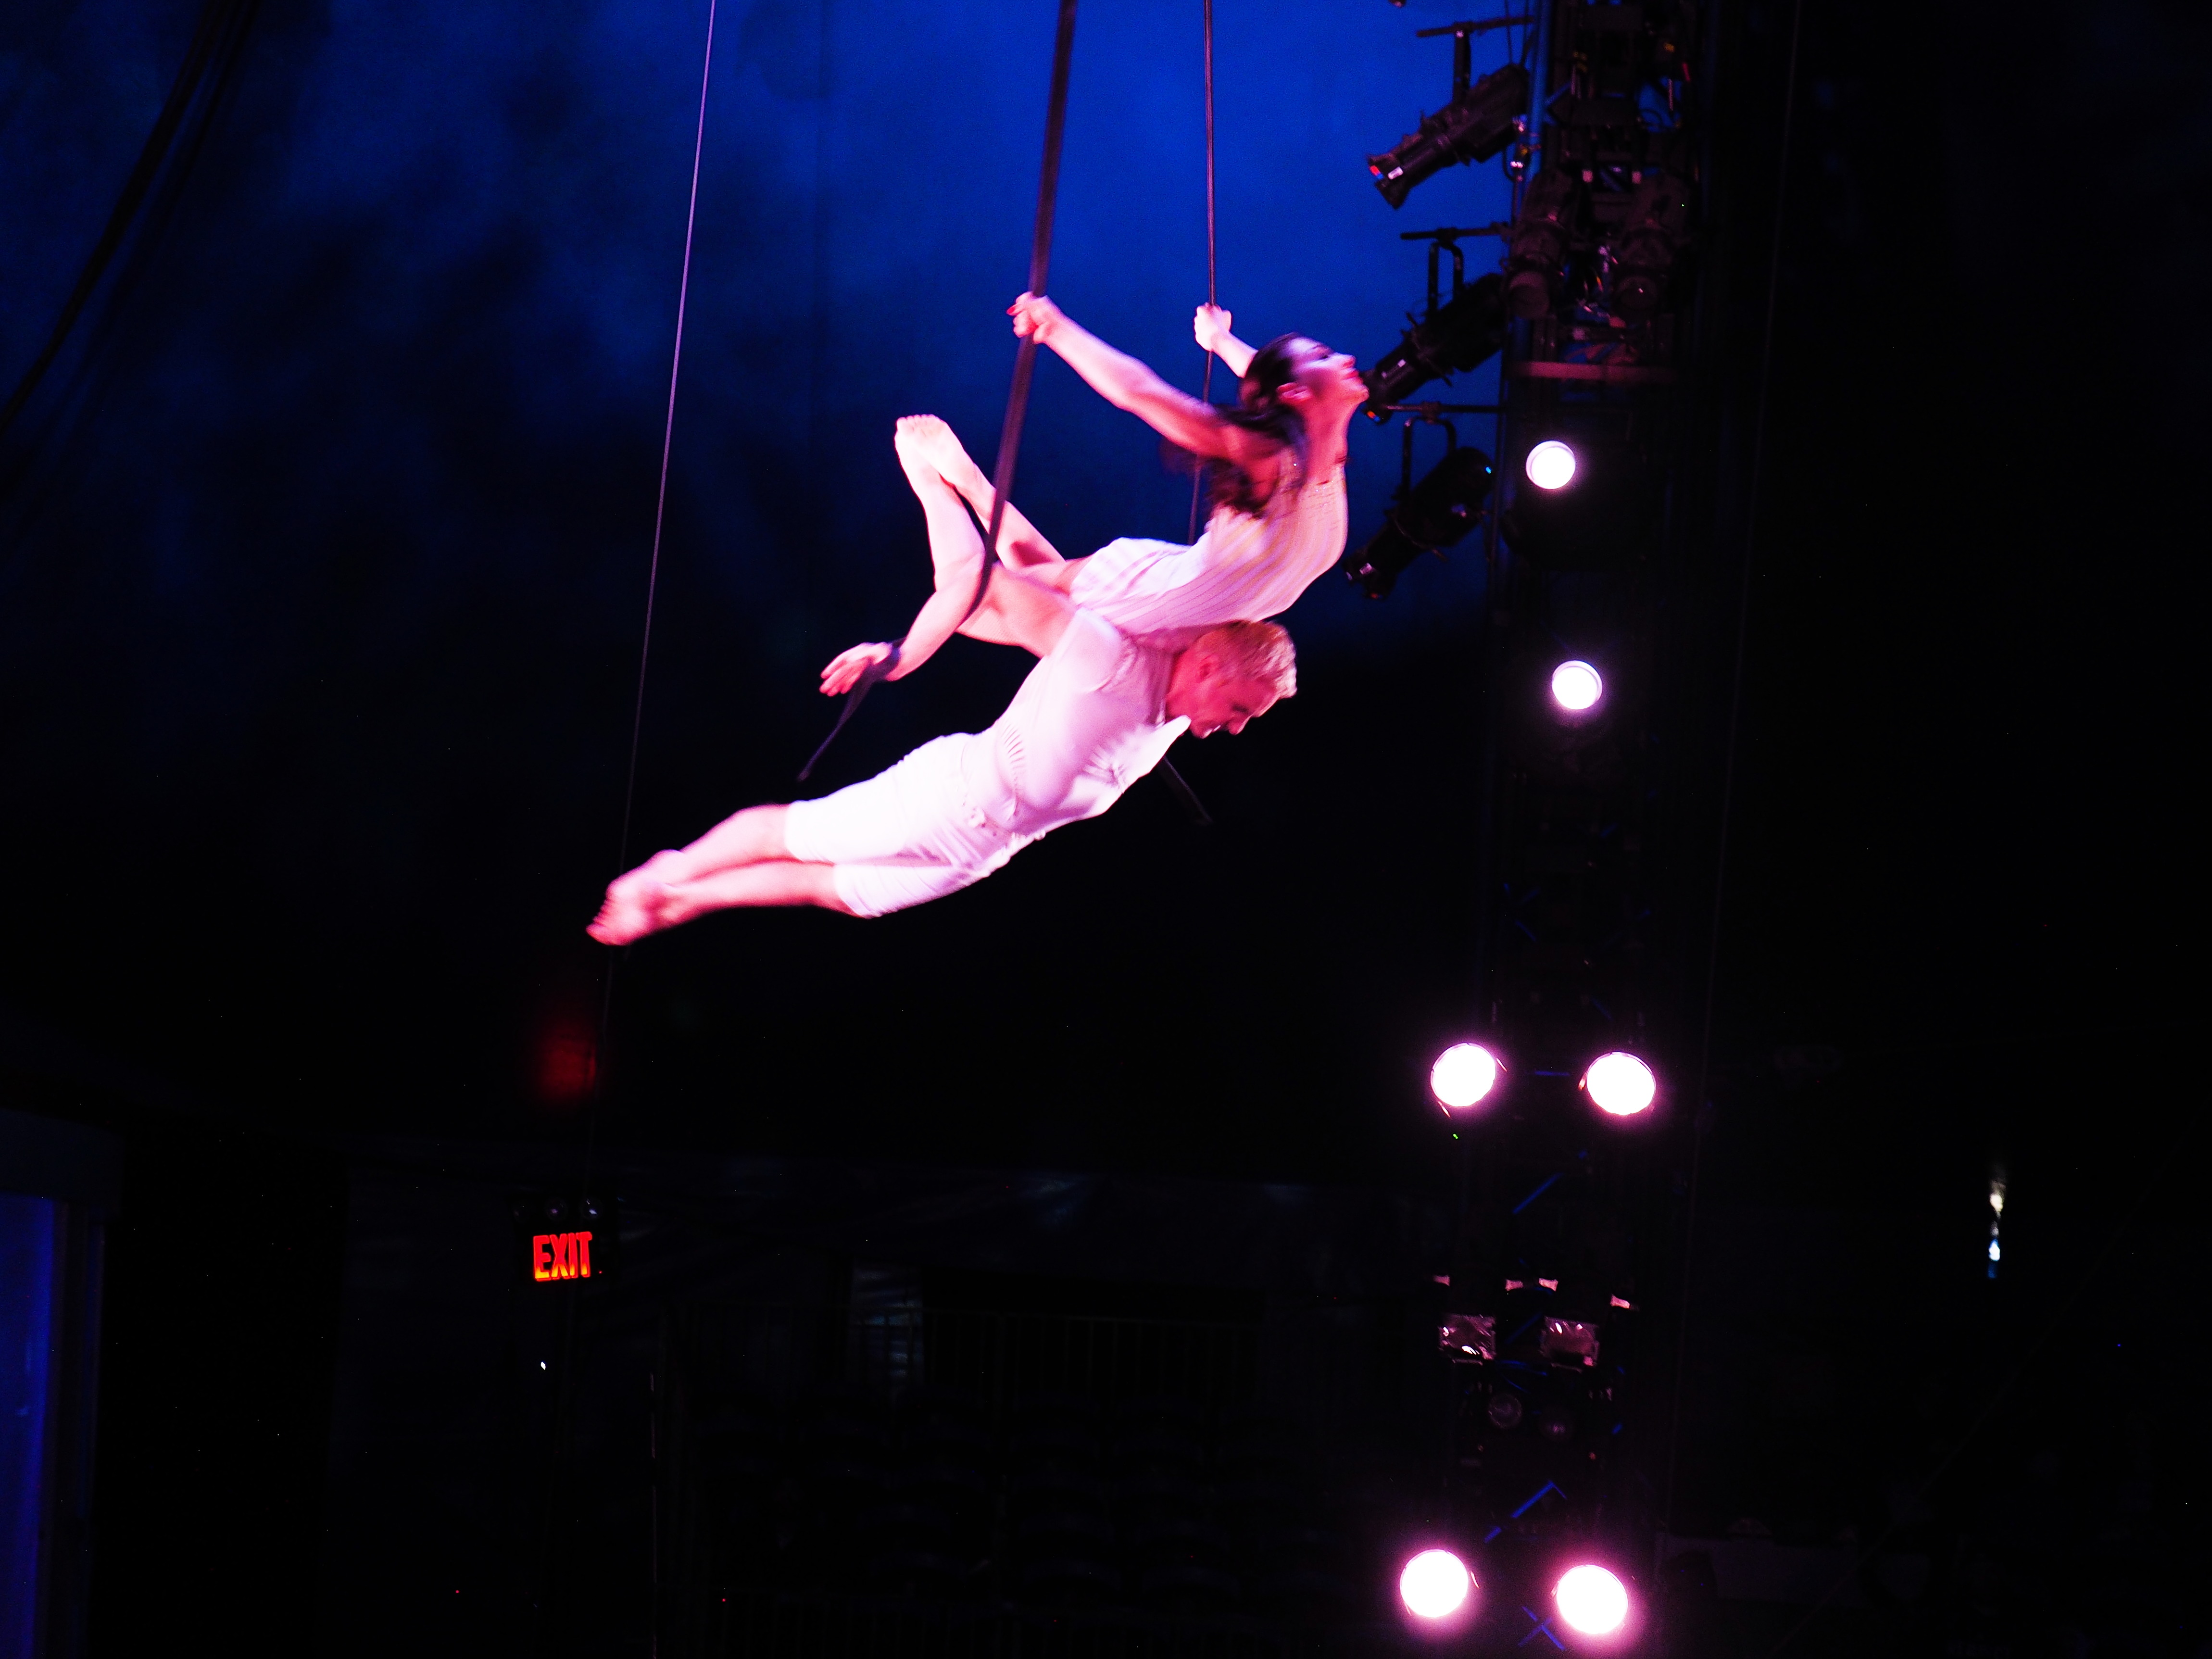 Aerialists #2